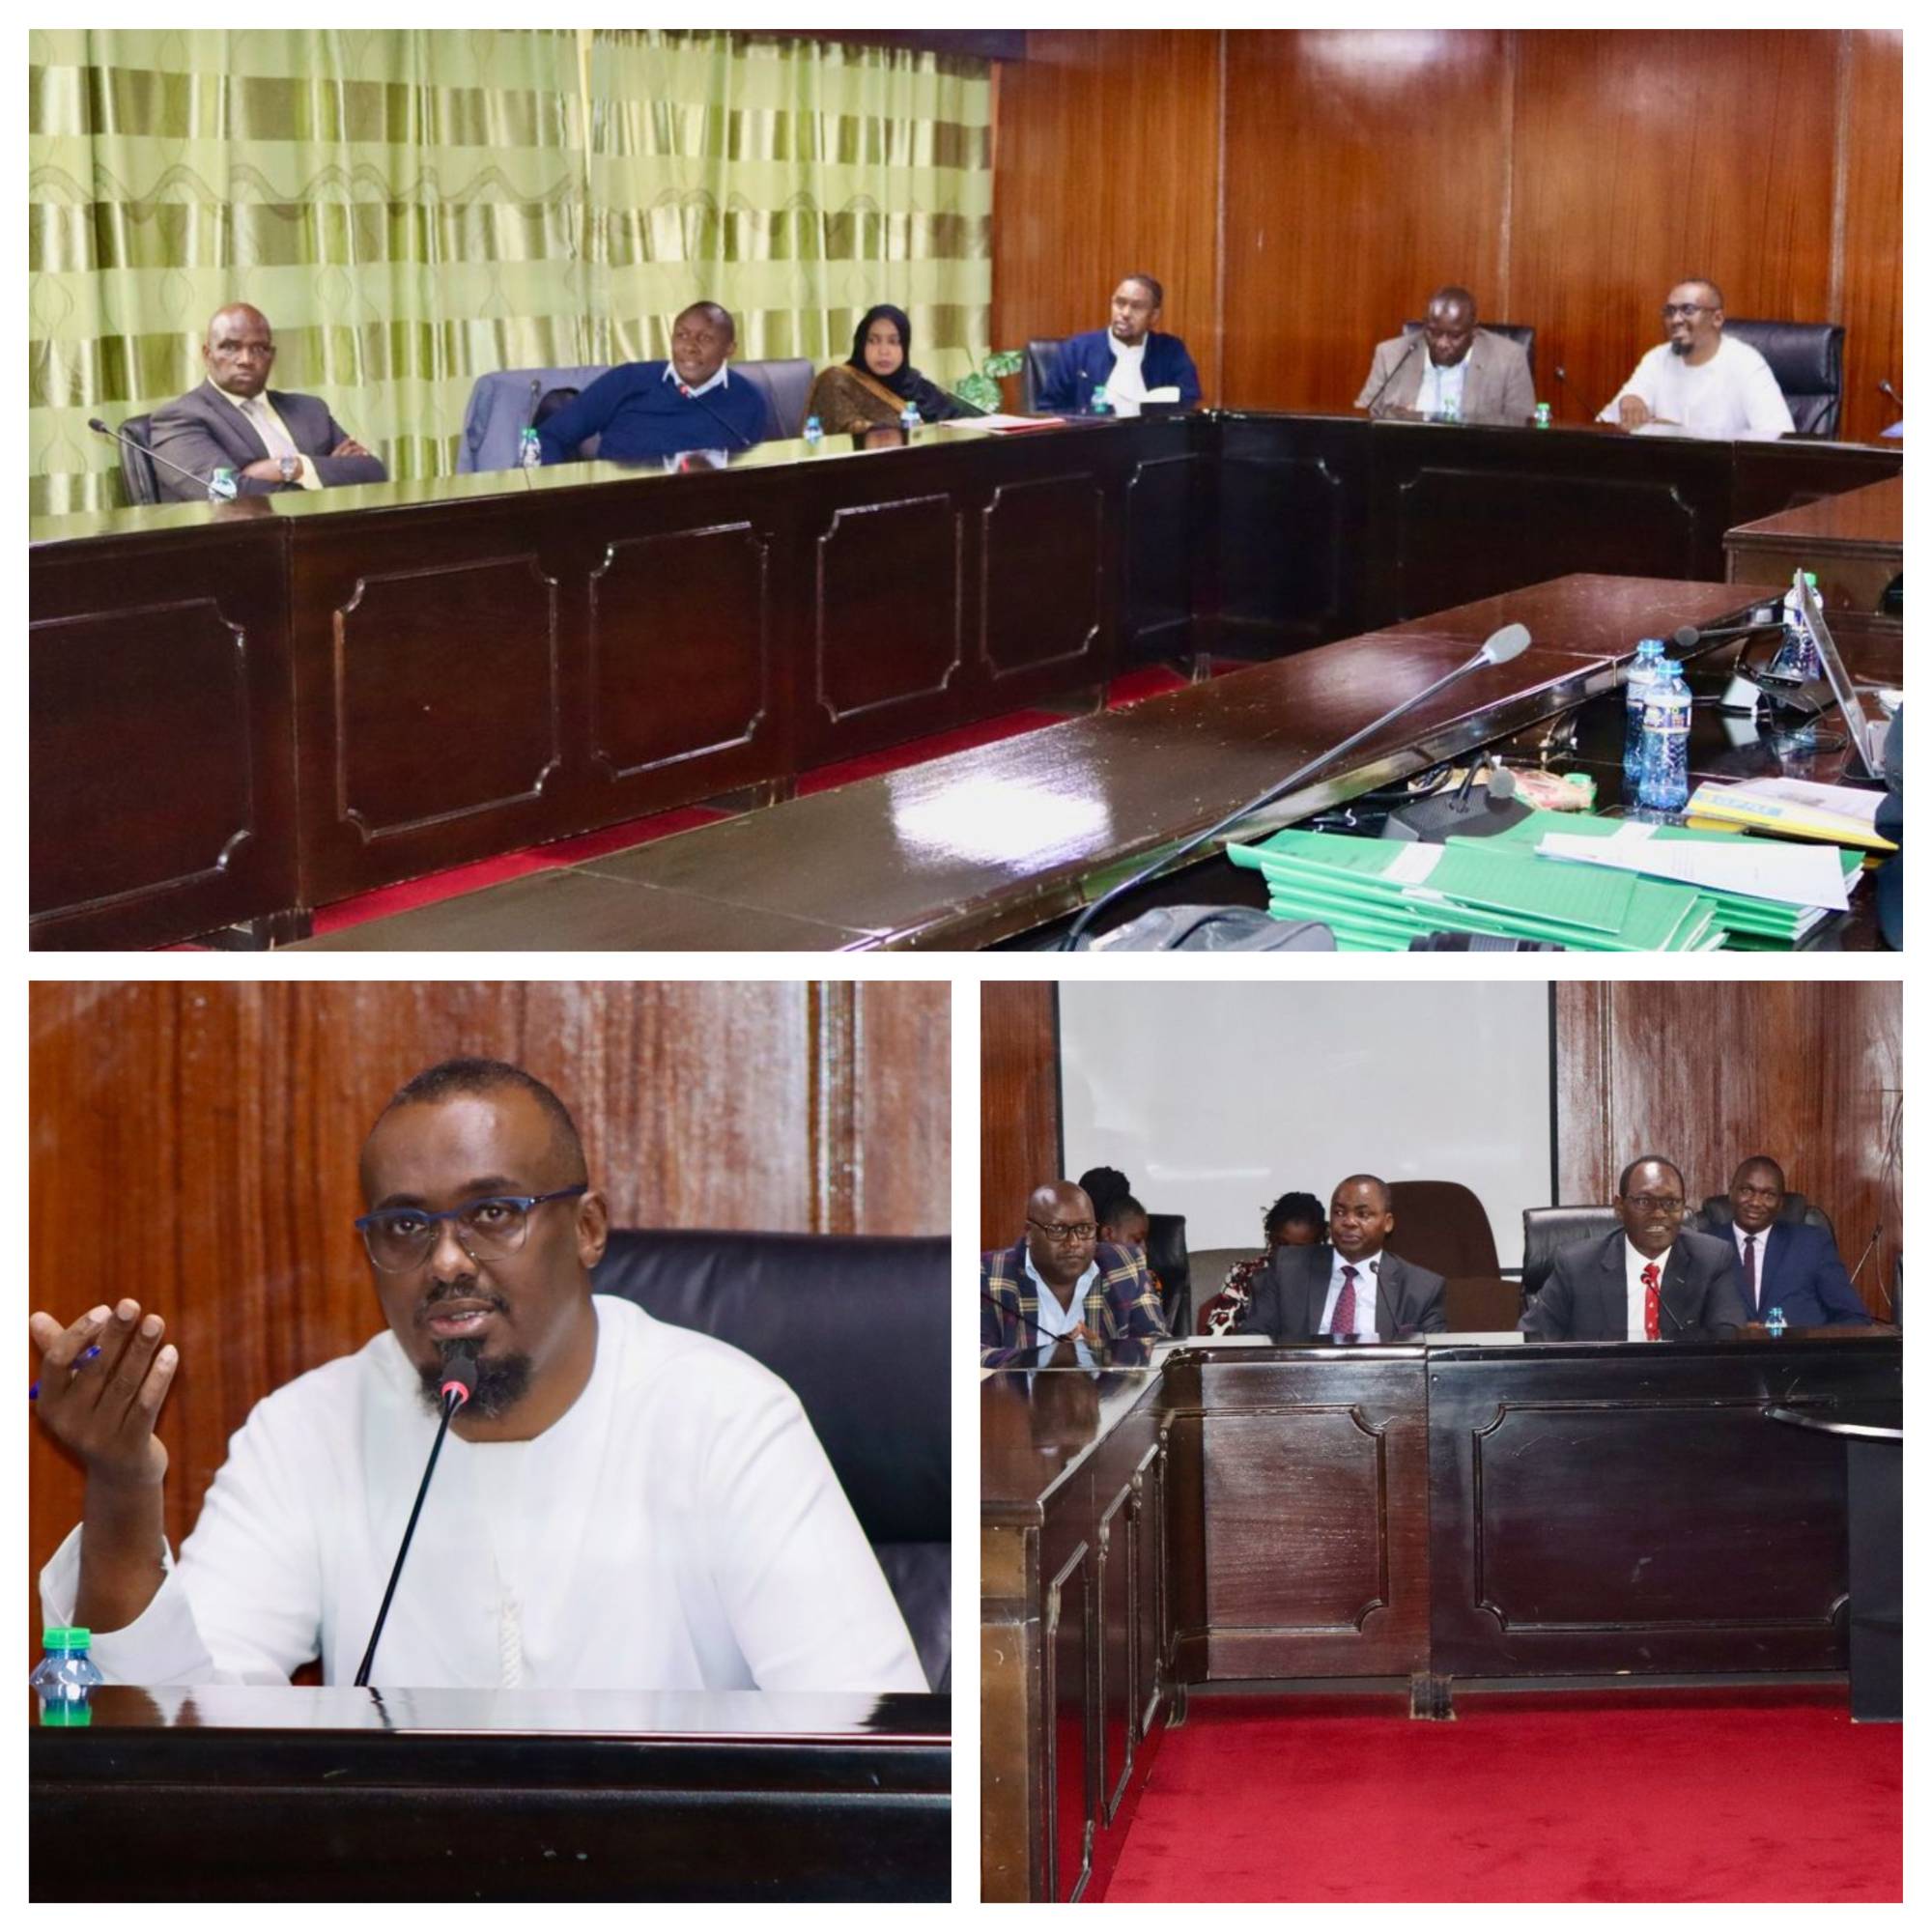 THE PUBLIC DEBT AND PRIVATIZATION COMMITTEE ENGAGES PRINCIPAL SECRETARY NATIONAL TREASURY ON THE CONSOLIDATED FUND SERVICE EXPENDITURES